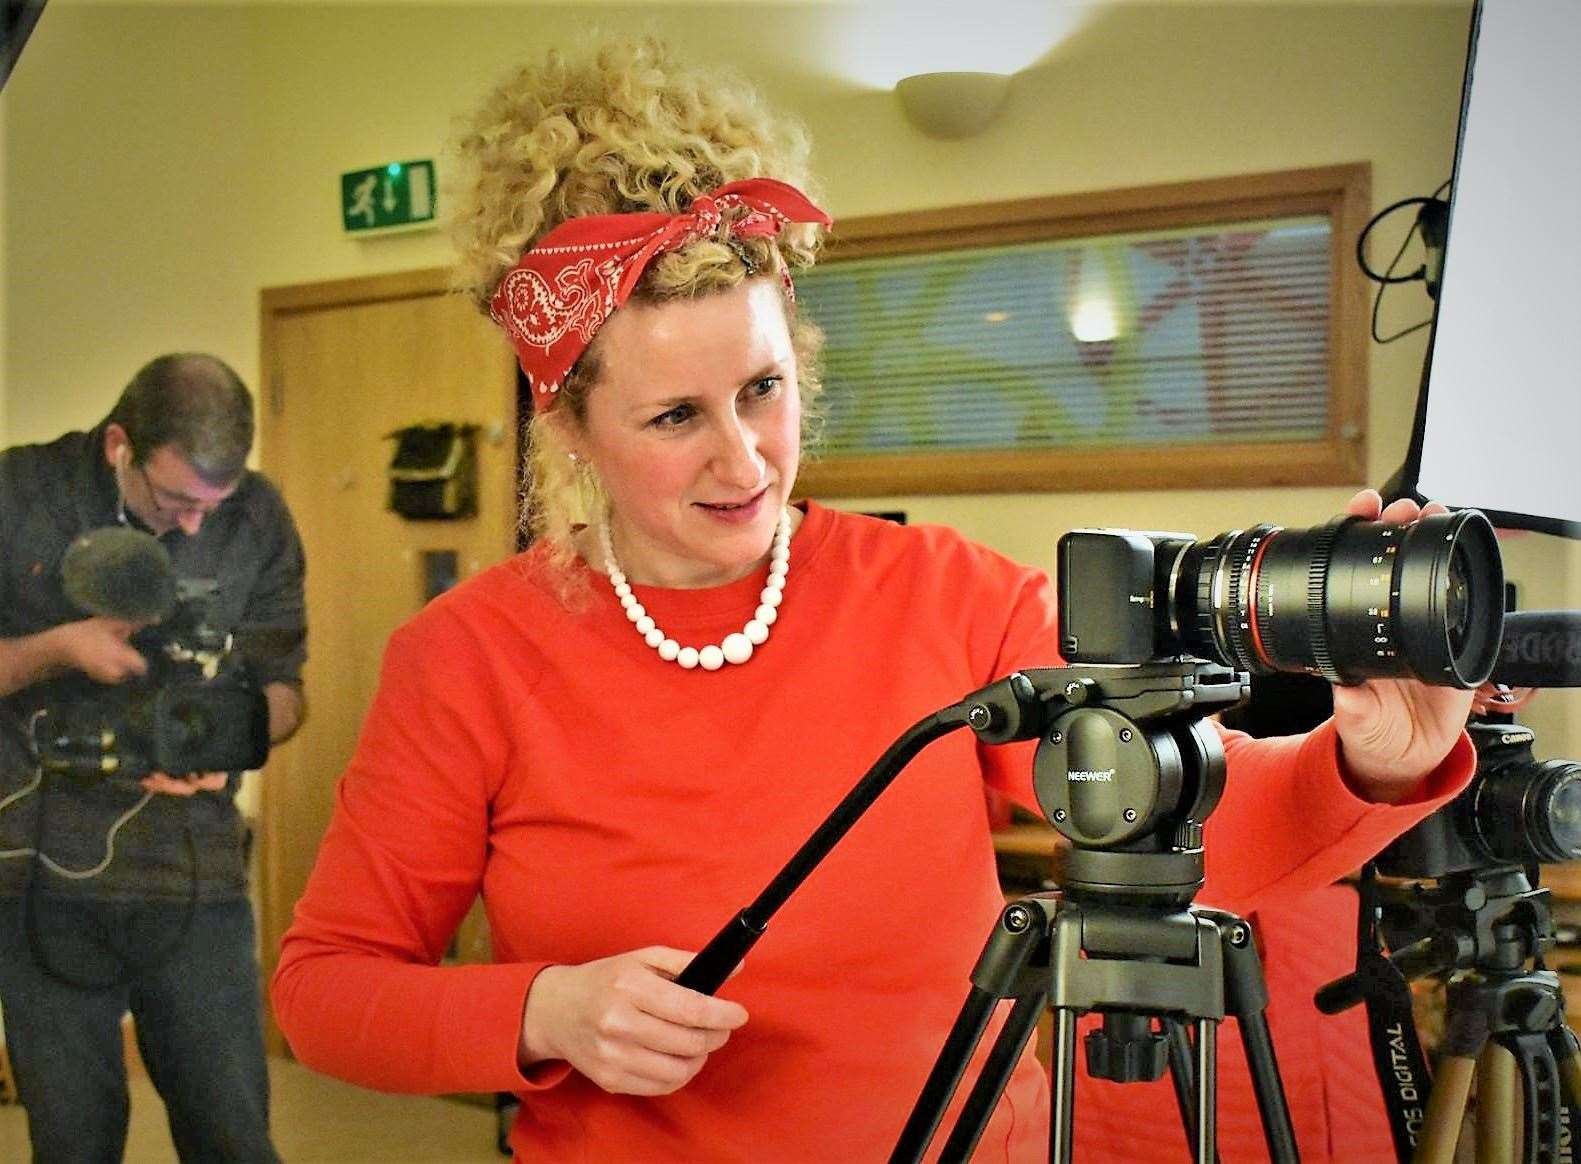 Project manager of the scheme, Wilma Smith, said she would like to see more applications sent in from budding filmmakers in Caithness and Sutherland.